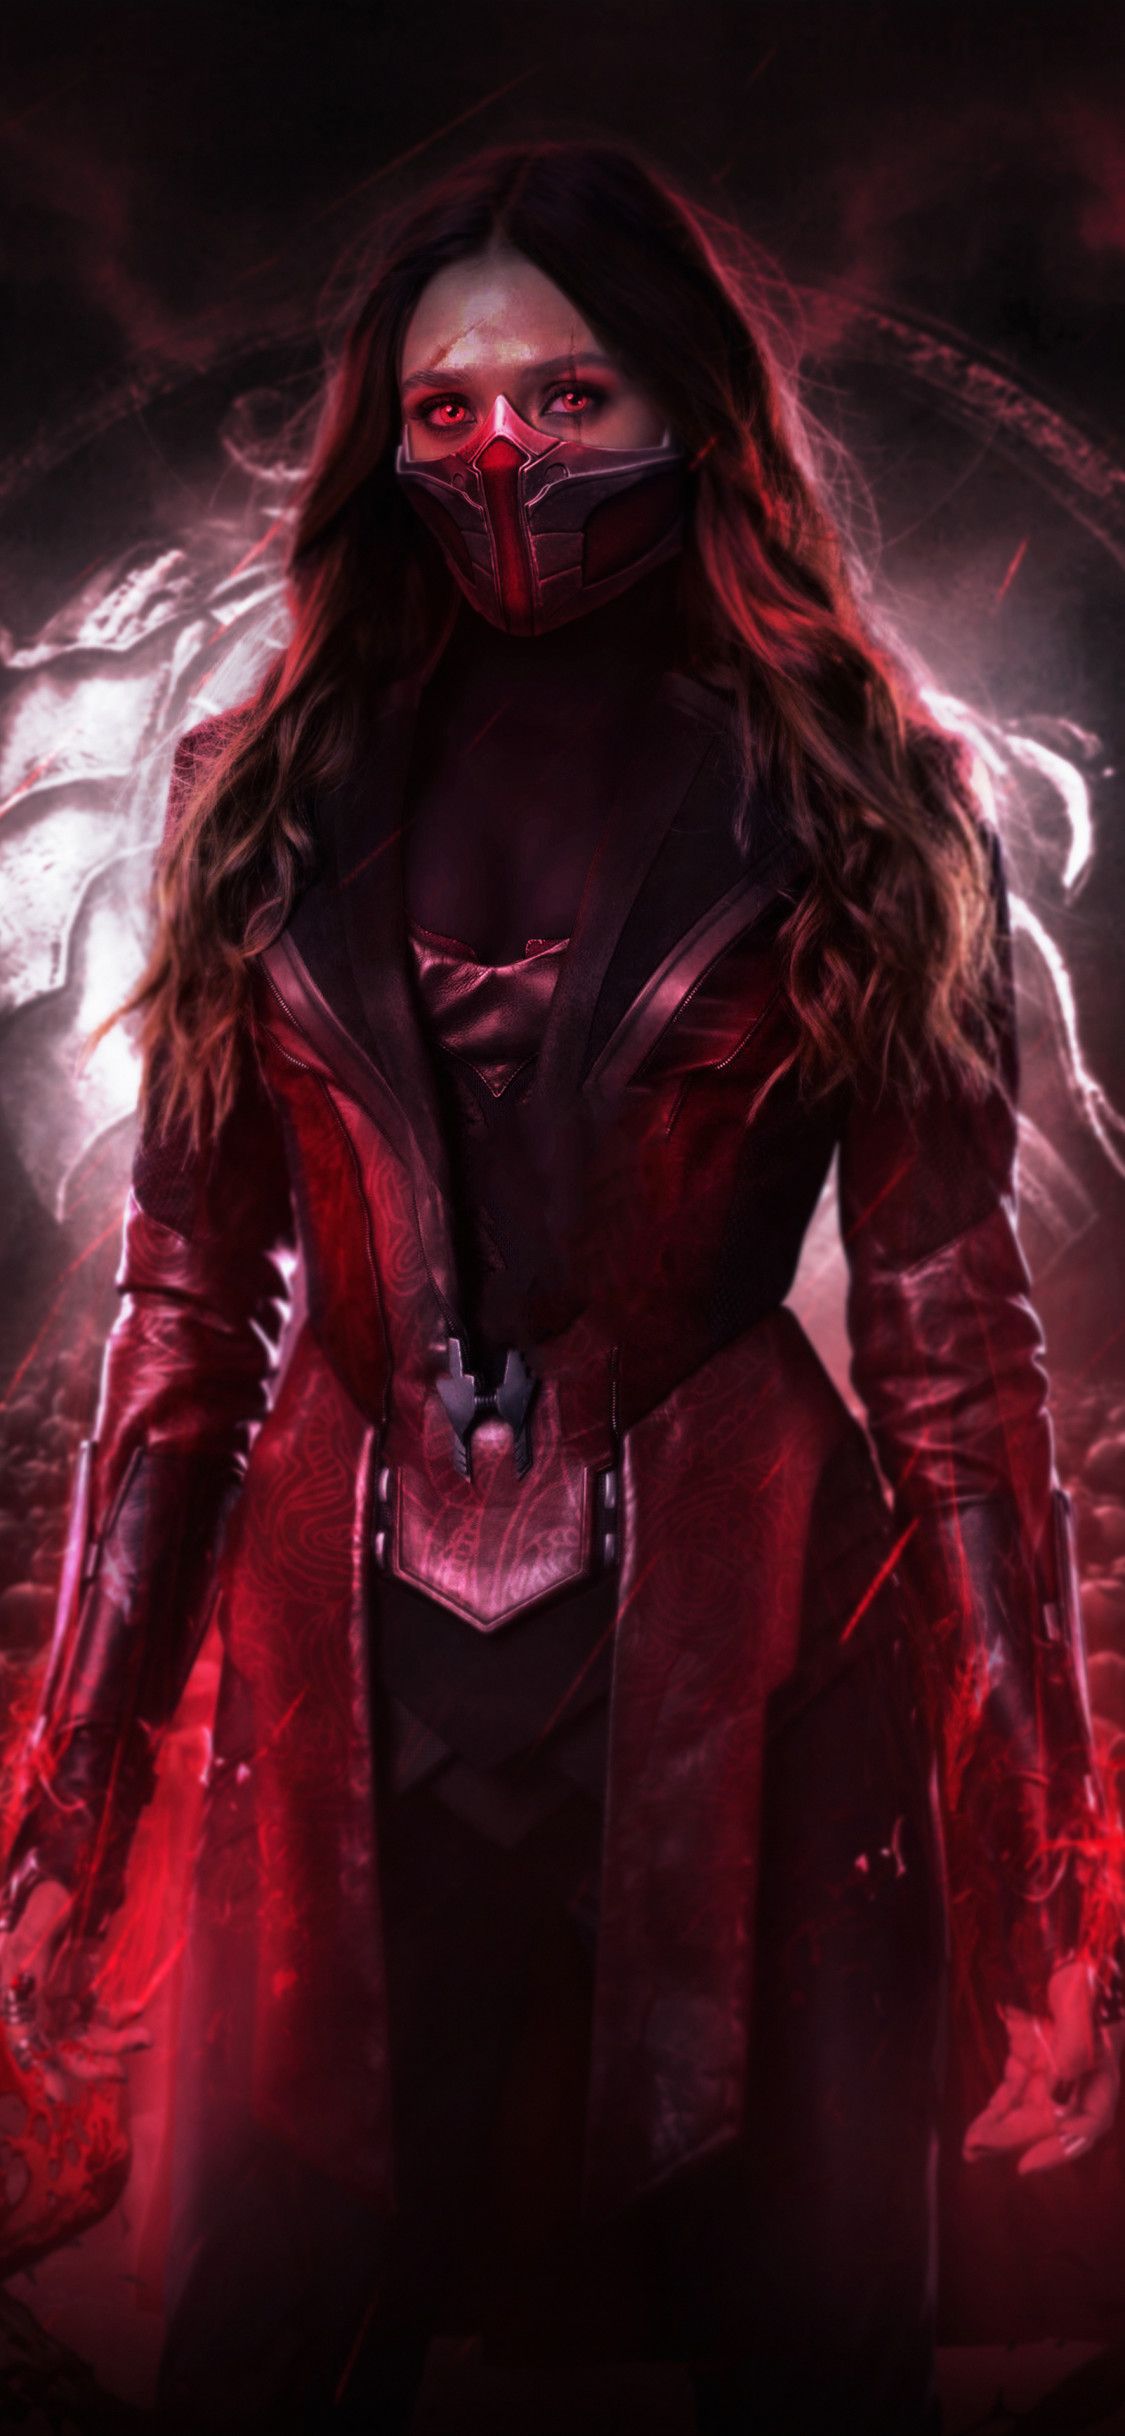 Scarlet Witch 4k New iPhone XS, iPhone iPhone X HD 4k Wallpaper, Image, Background, Photo. Scarlet witch, Marvel characters, Scarlet witch marvel